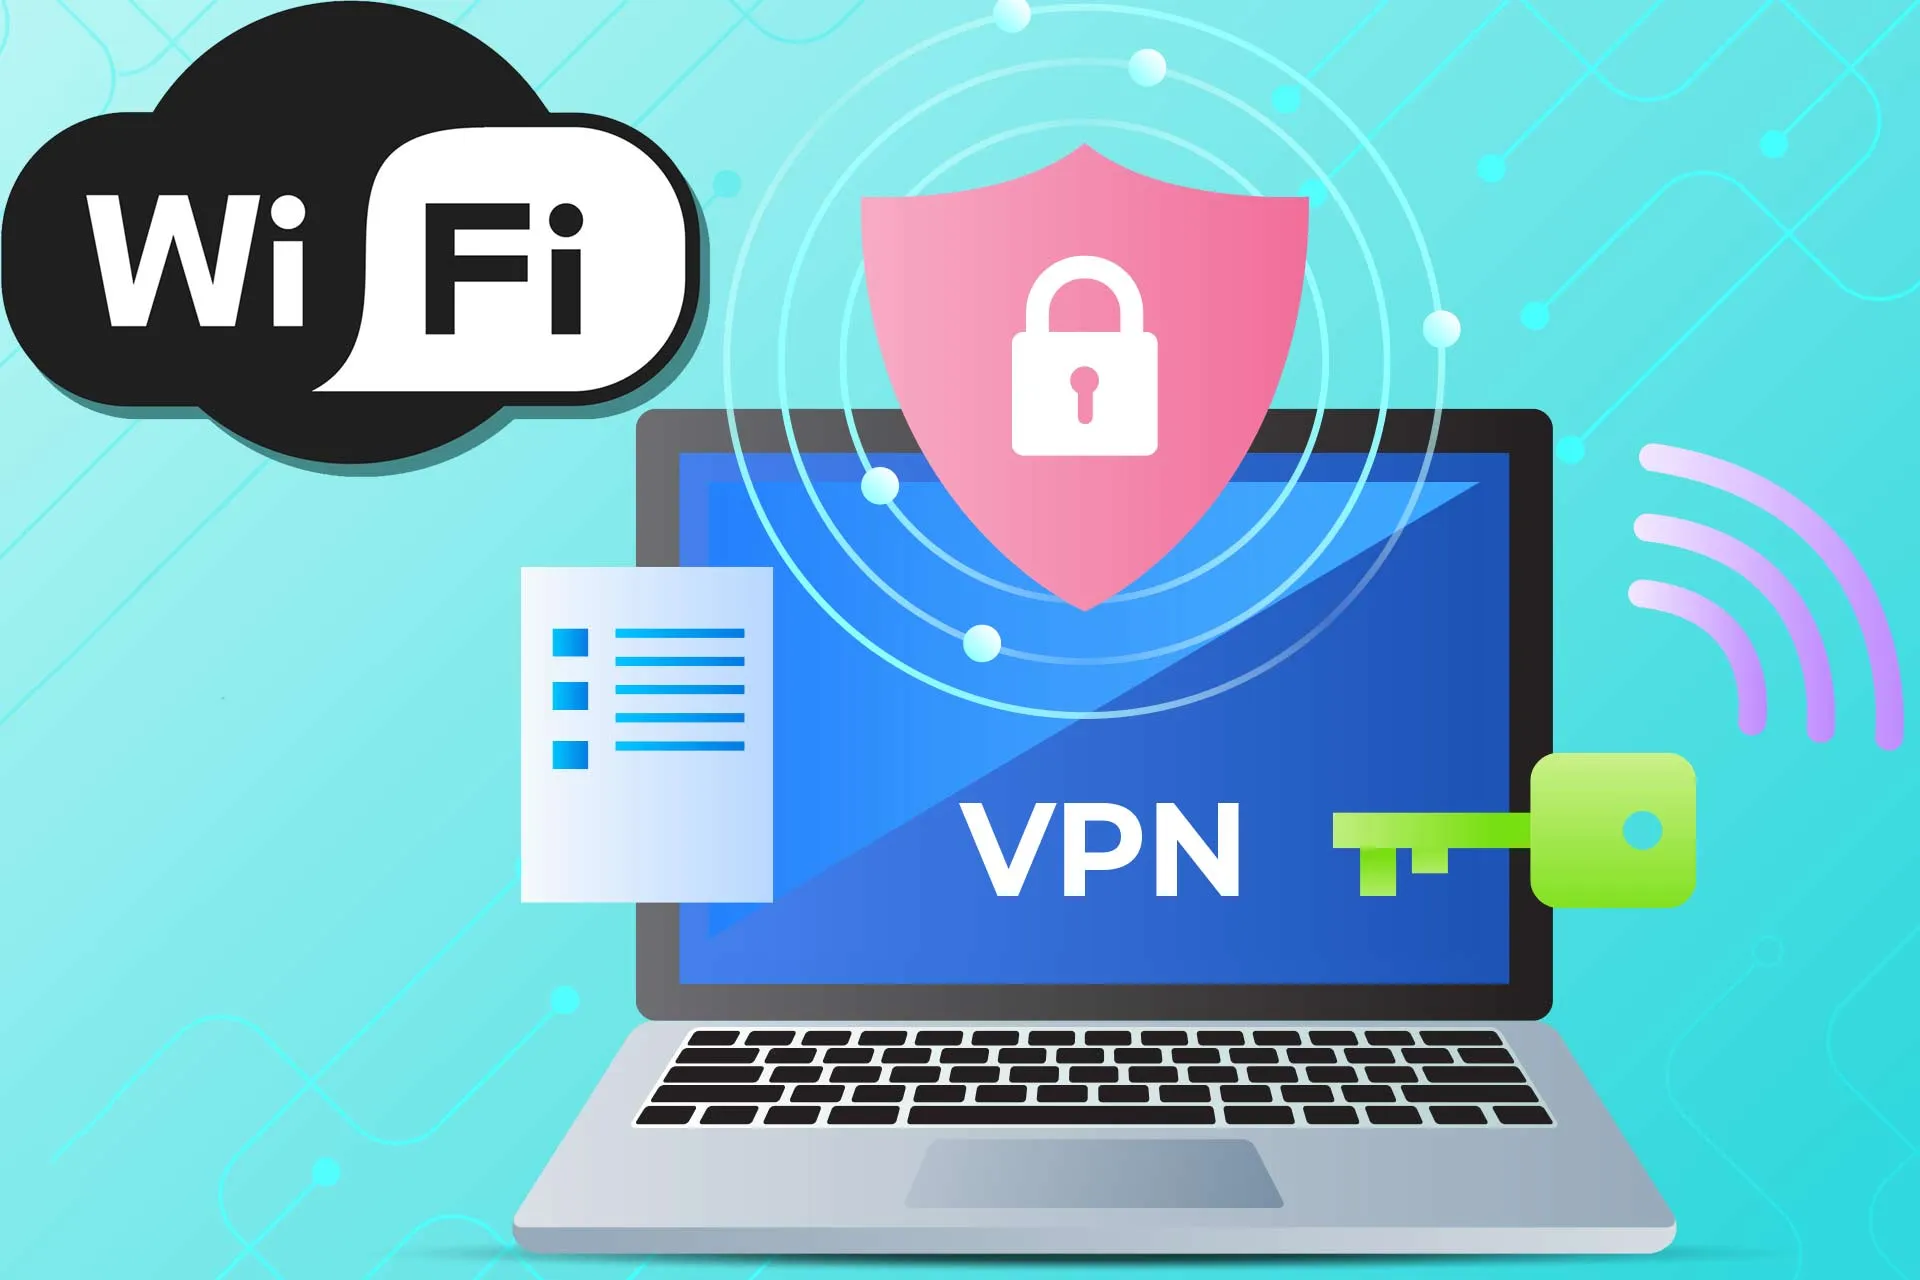 Does VPN Use Data While on WiFi